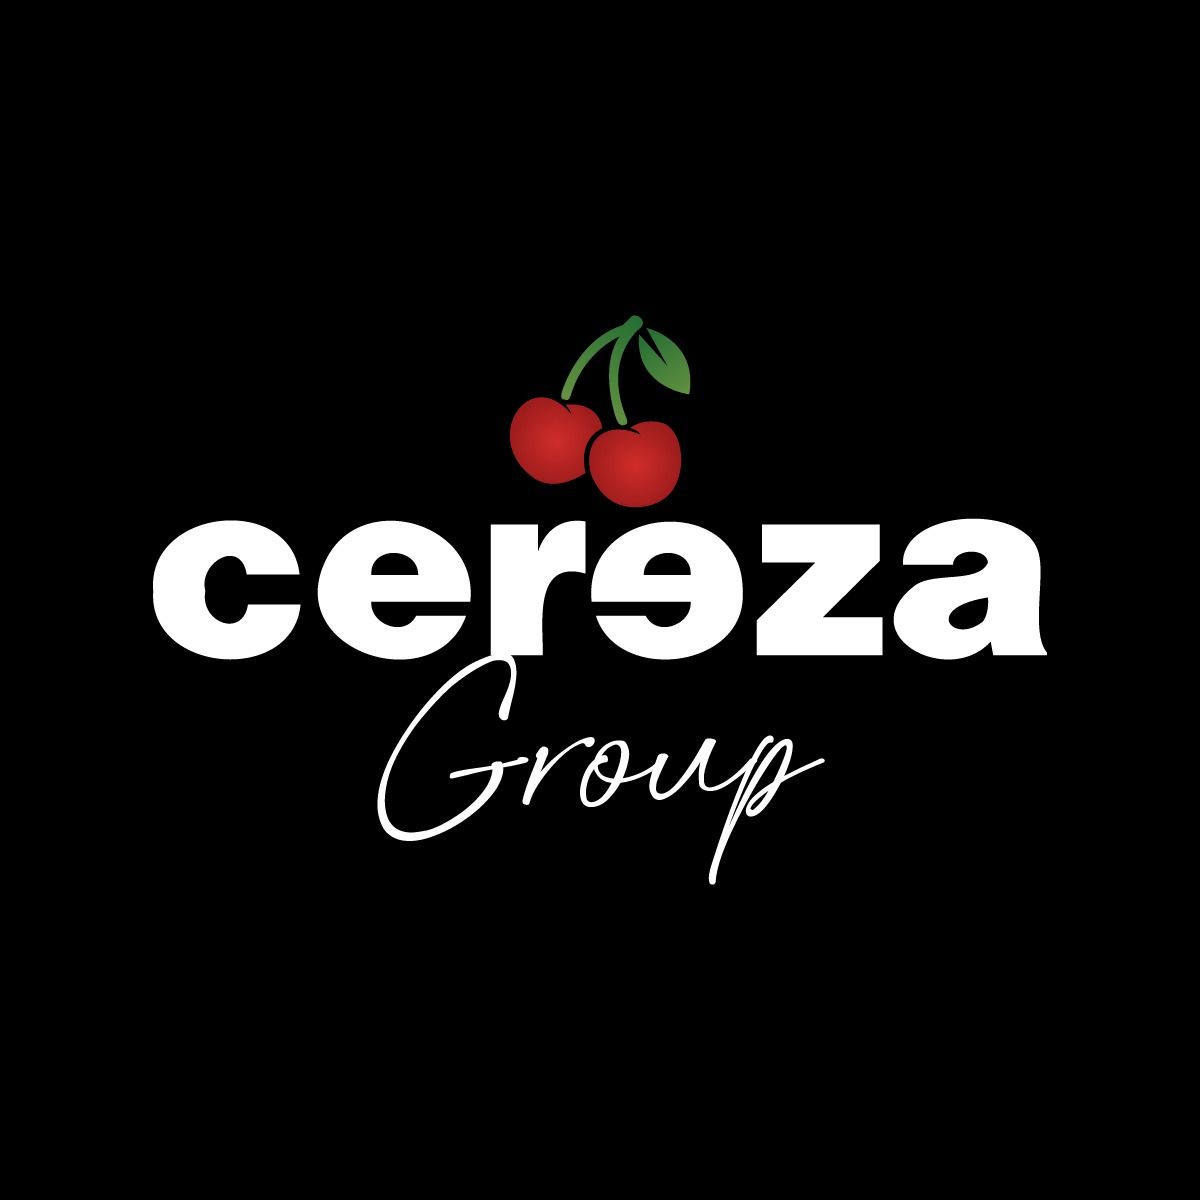 CEREZA CLOTHING IMPORT AND EXPORT SAS